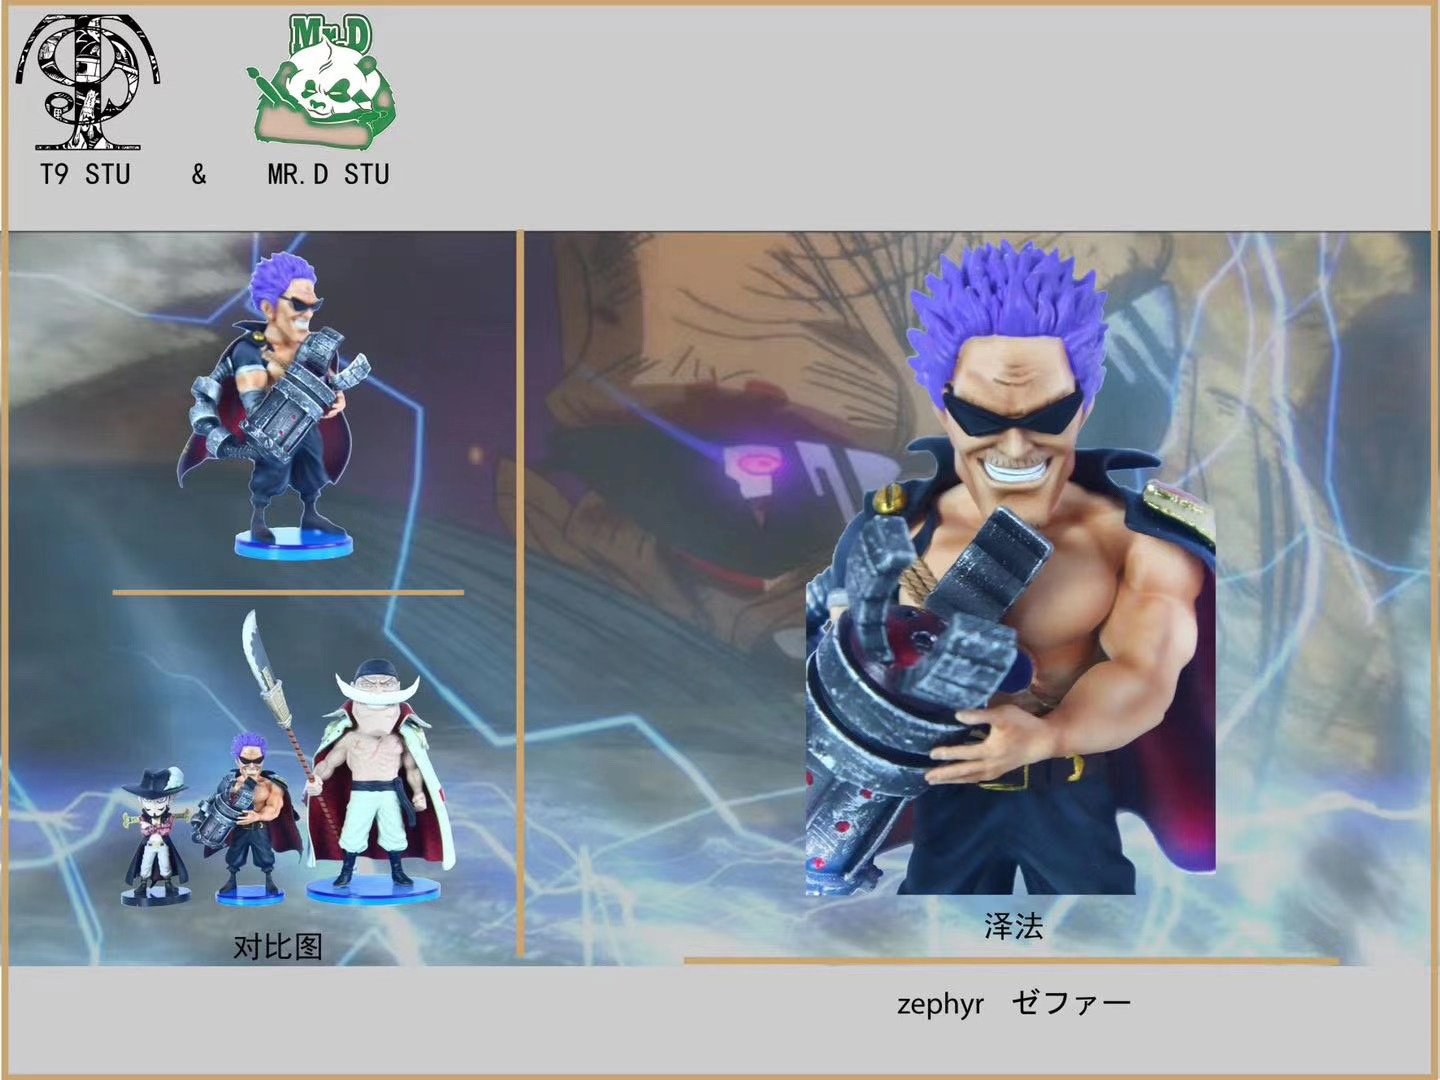 PRE-ORDER] One Piece GK Figures - Smoker And Zephyr GK1509